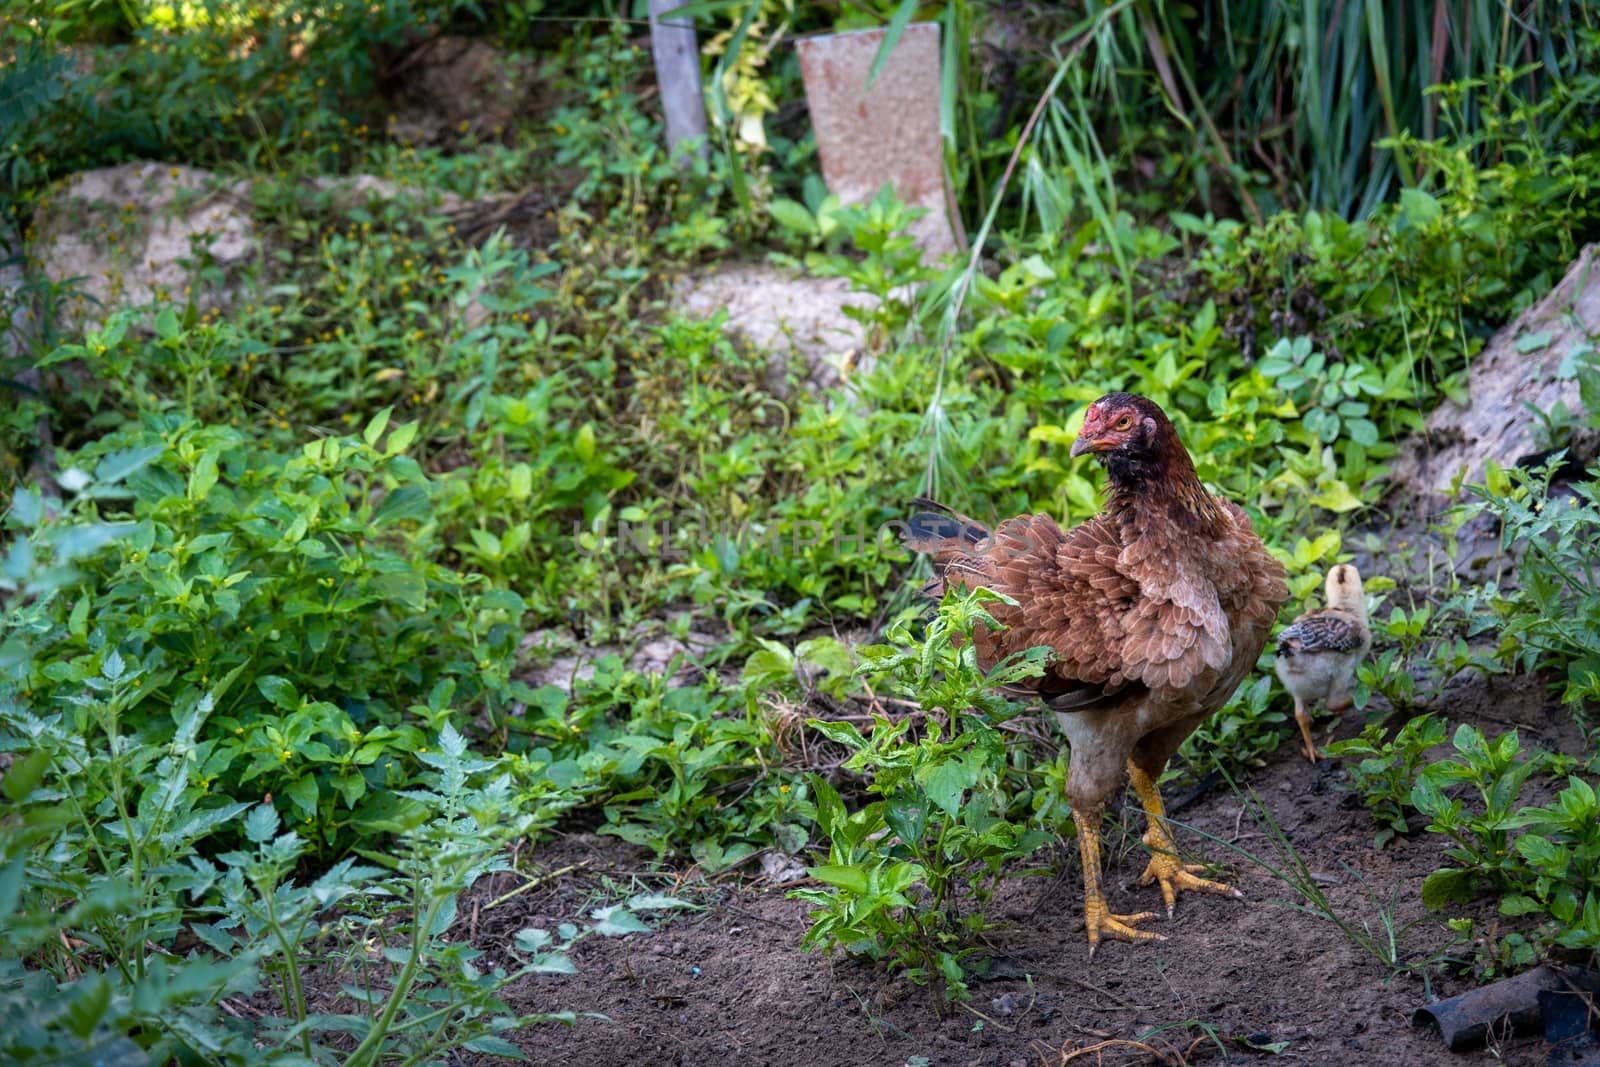 Brown hen chicken standing in field use for farm animals, livest. Ock domestic pets animals